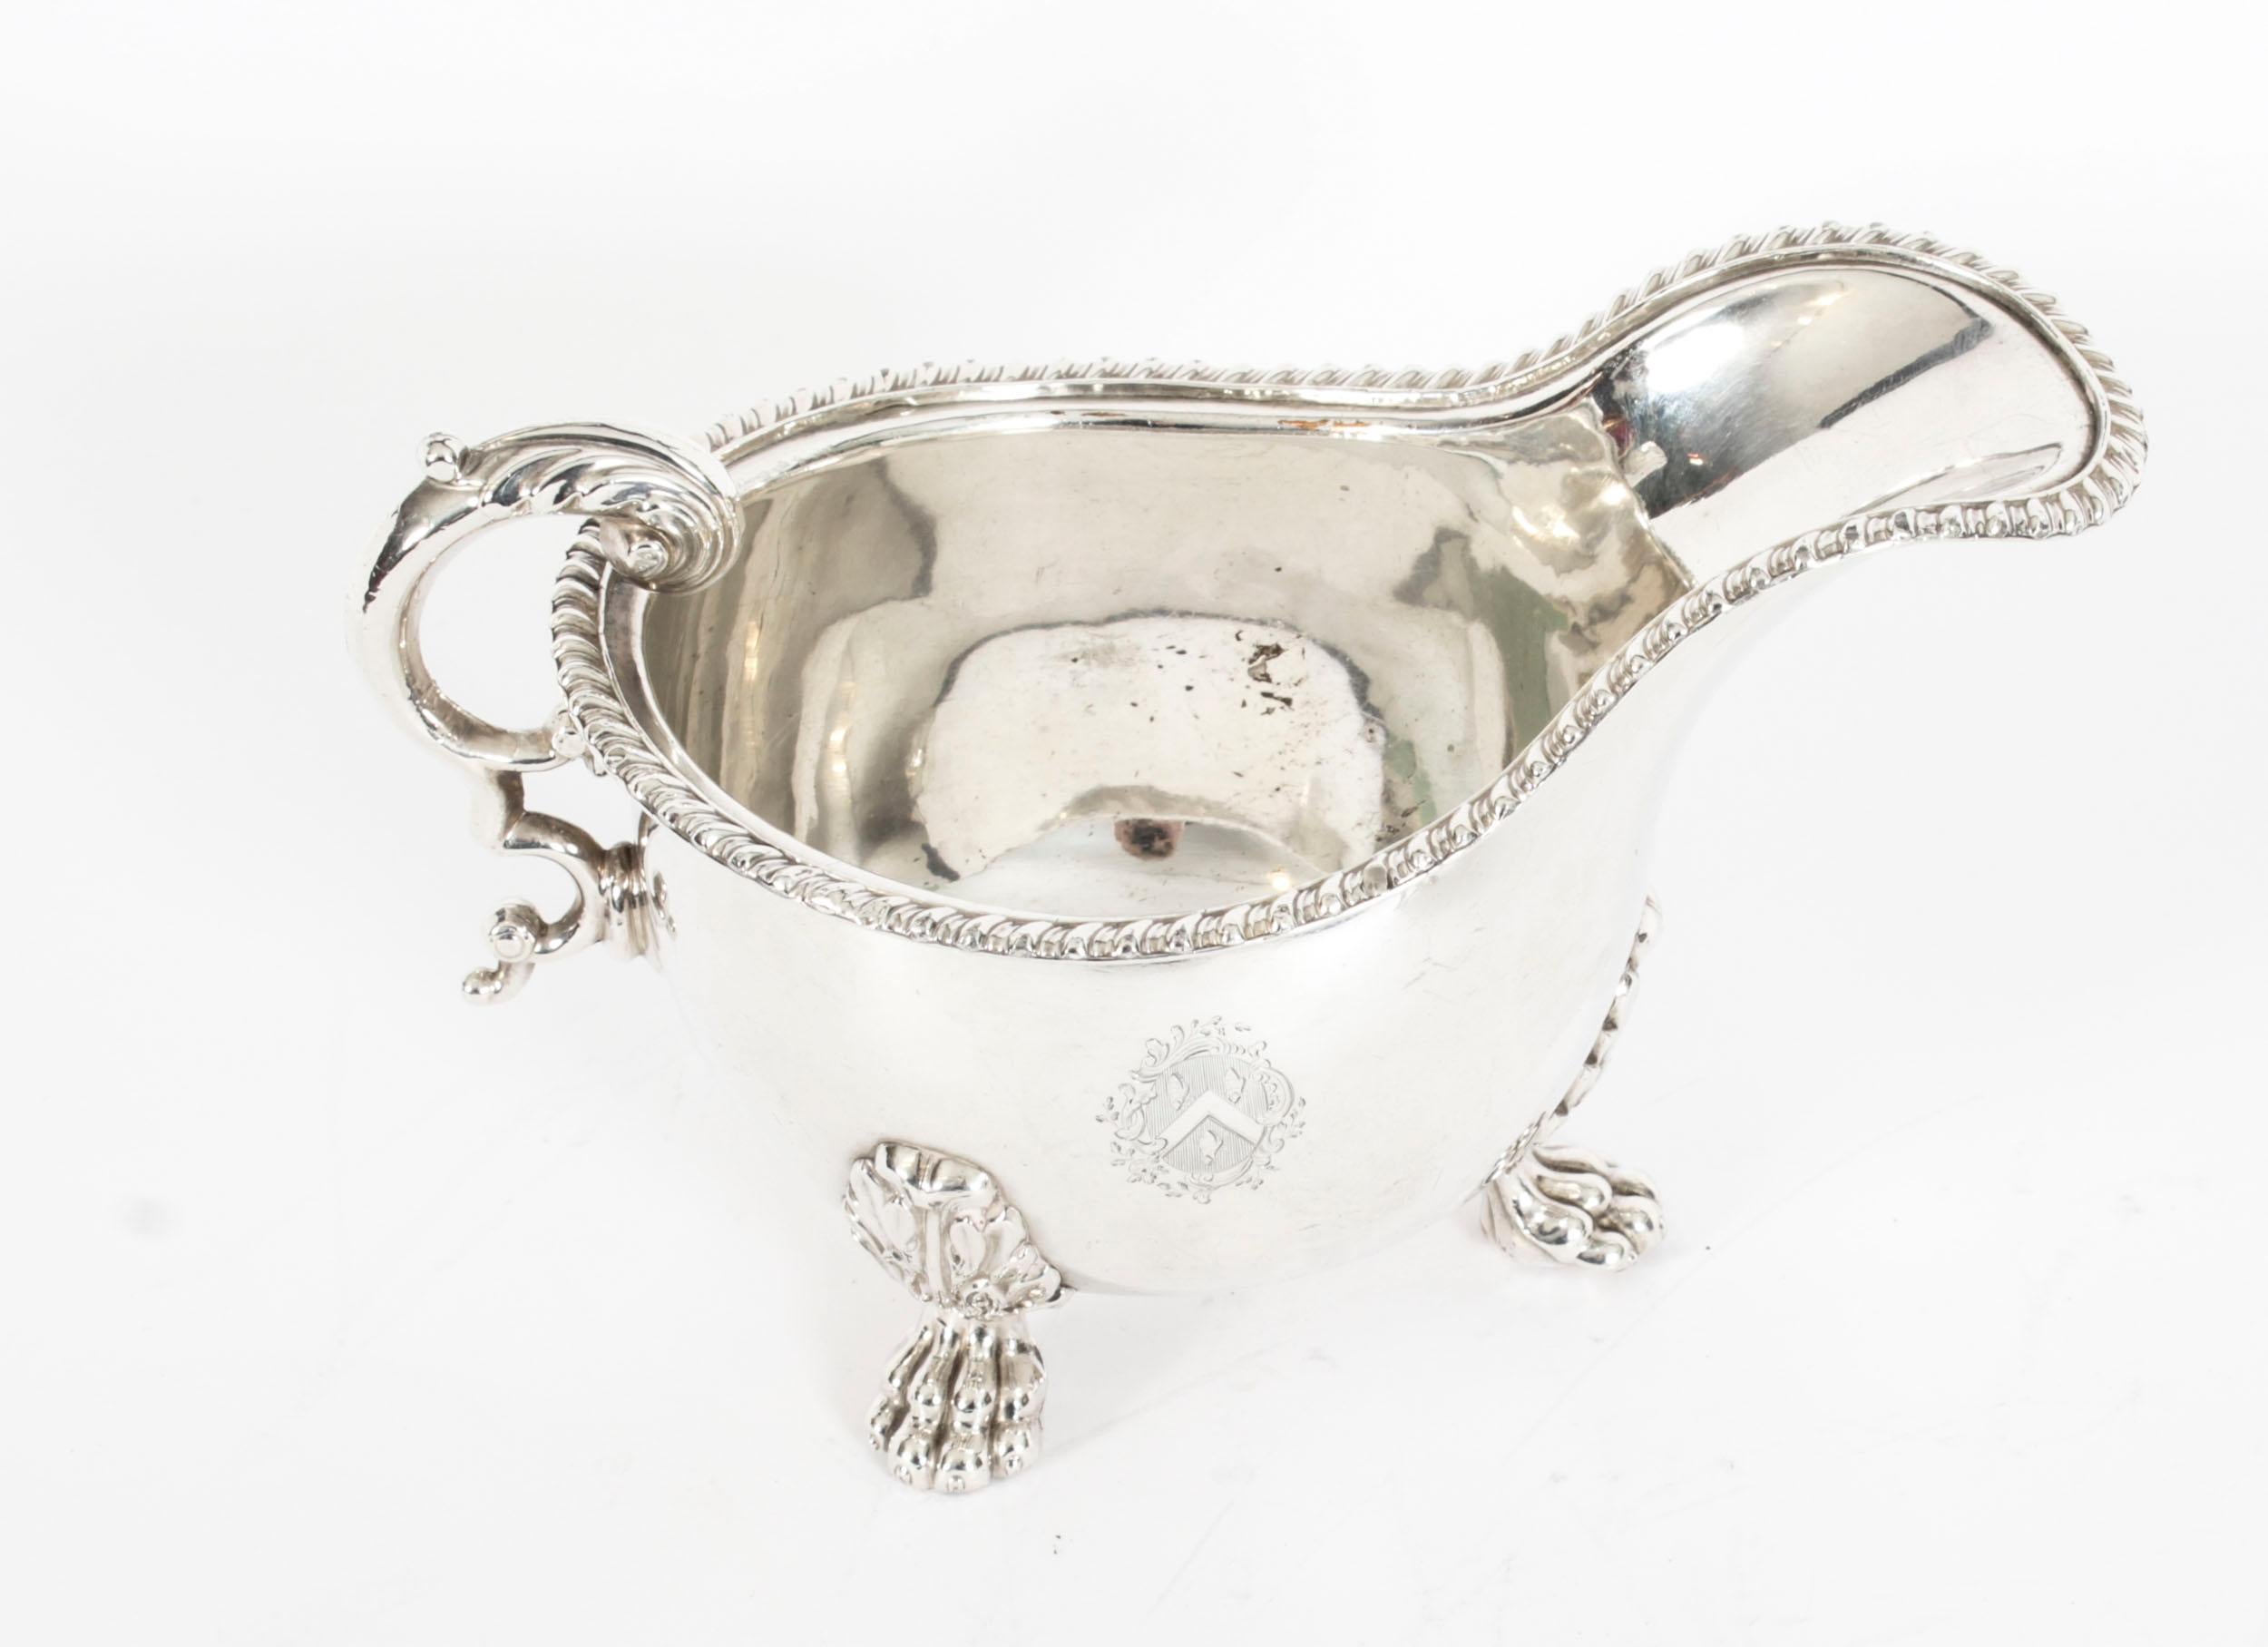 This is a elegant pair of Old Sheffield silver plated sauce boats, circa 1830 in date.
 
The sauce boats feature oval shape bodys with beautiful gadrooned borders, each with an engraved central coat of arms and classical handles with chased